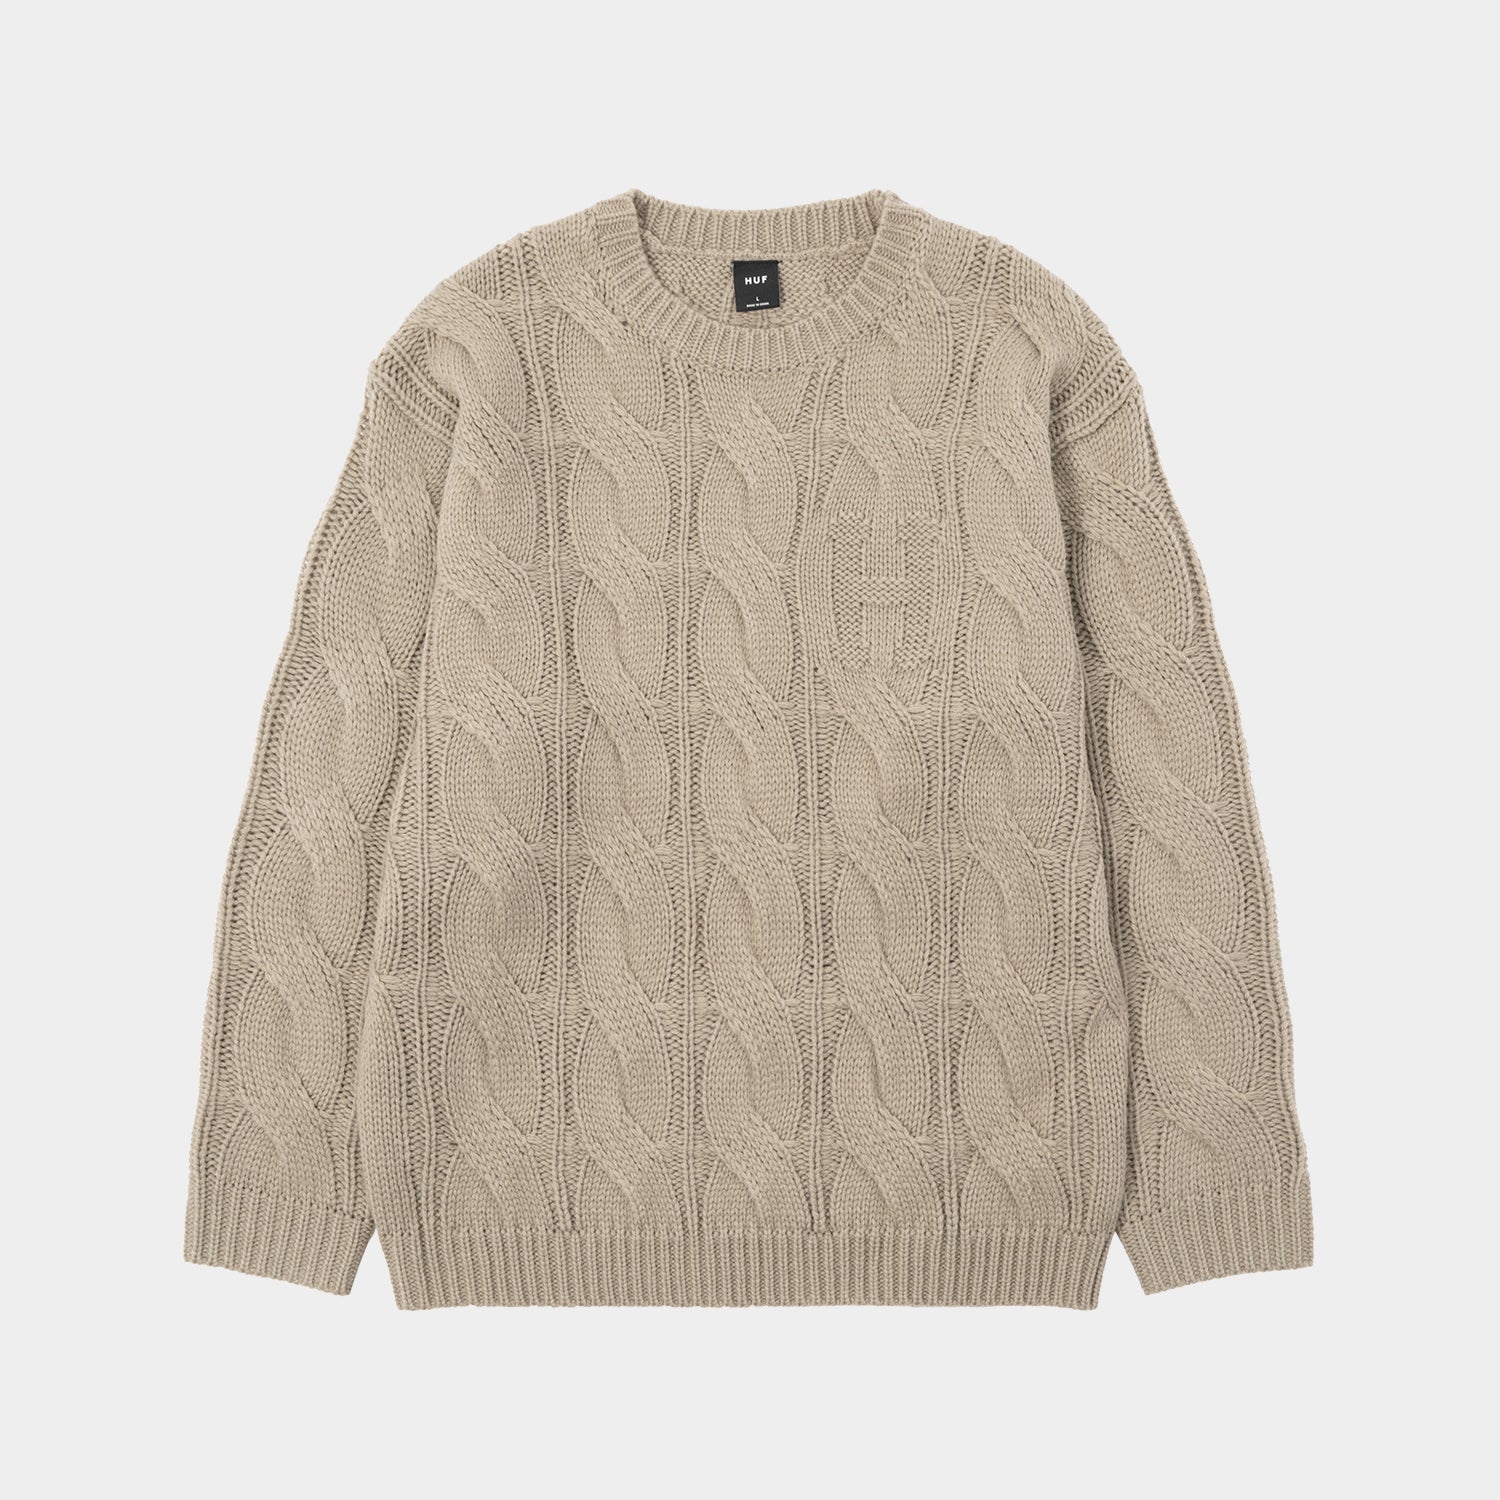 CLASSIC H CABLE SWEATER - HUF Worldwide JP